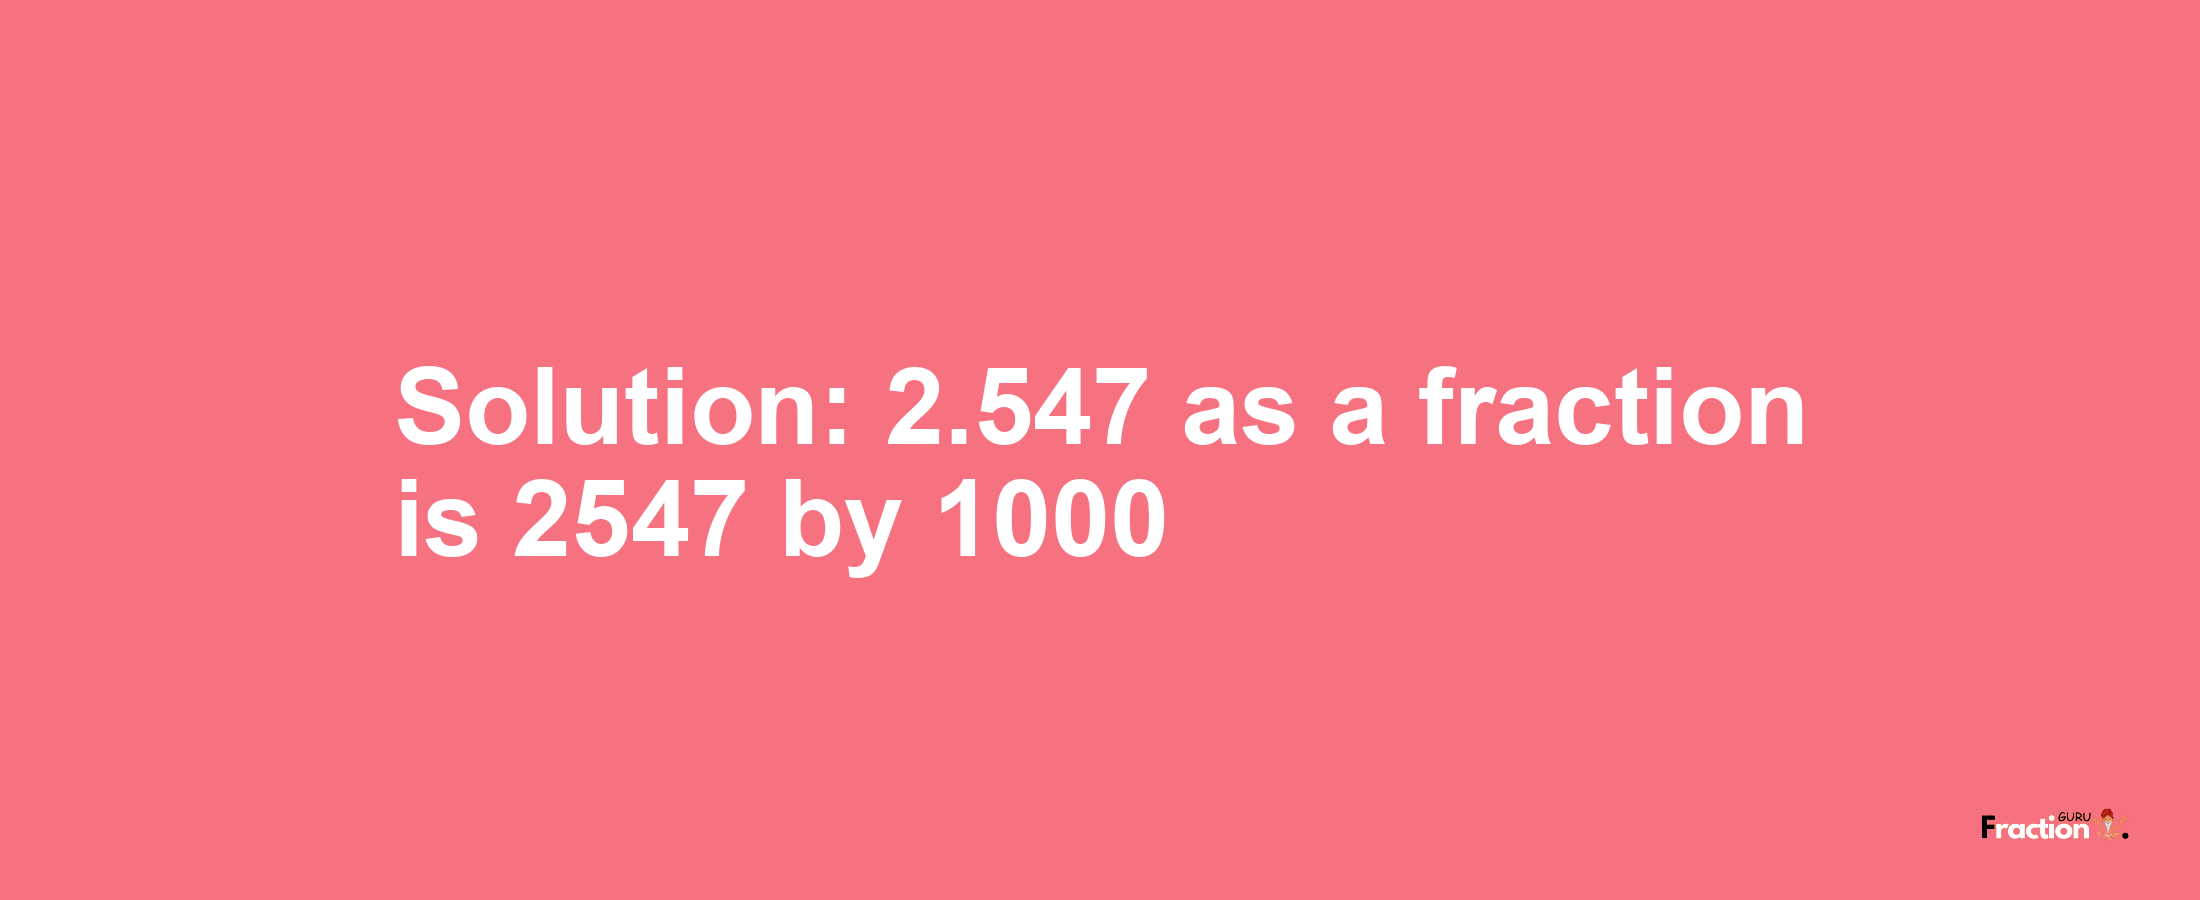 Solution:2.547 as a fraction is 2547/1000